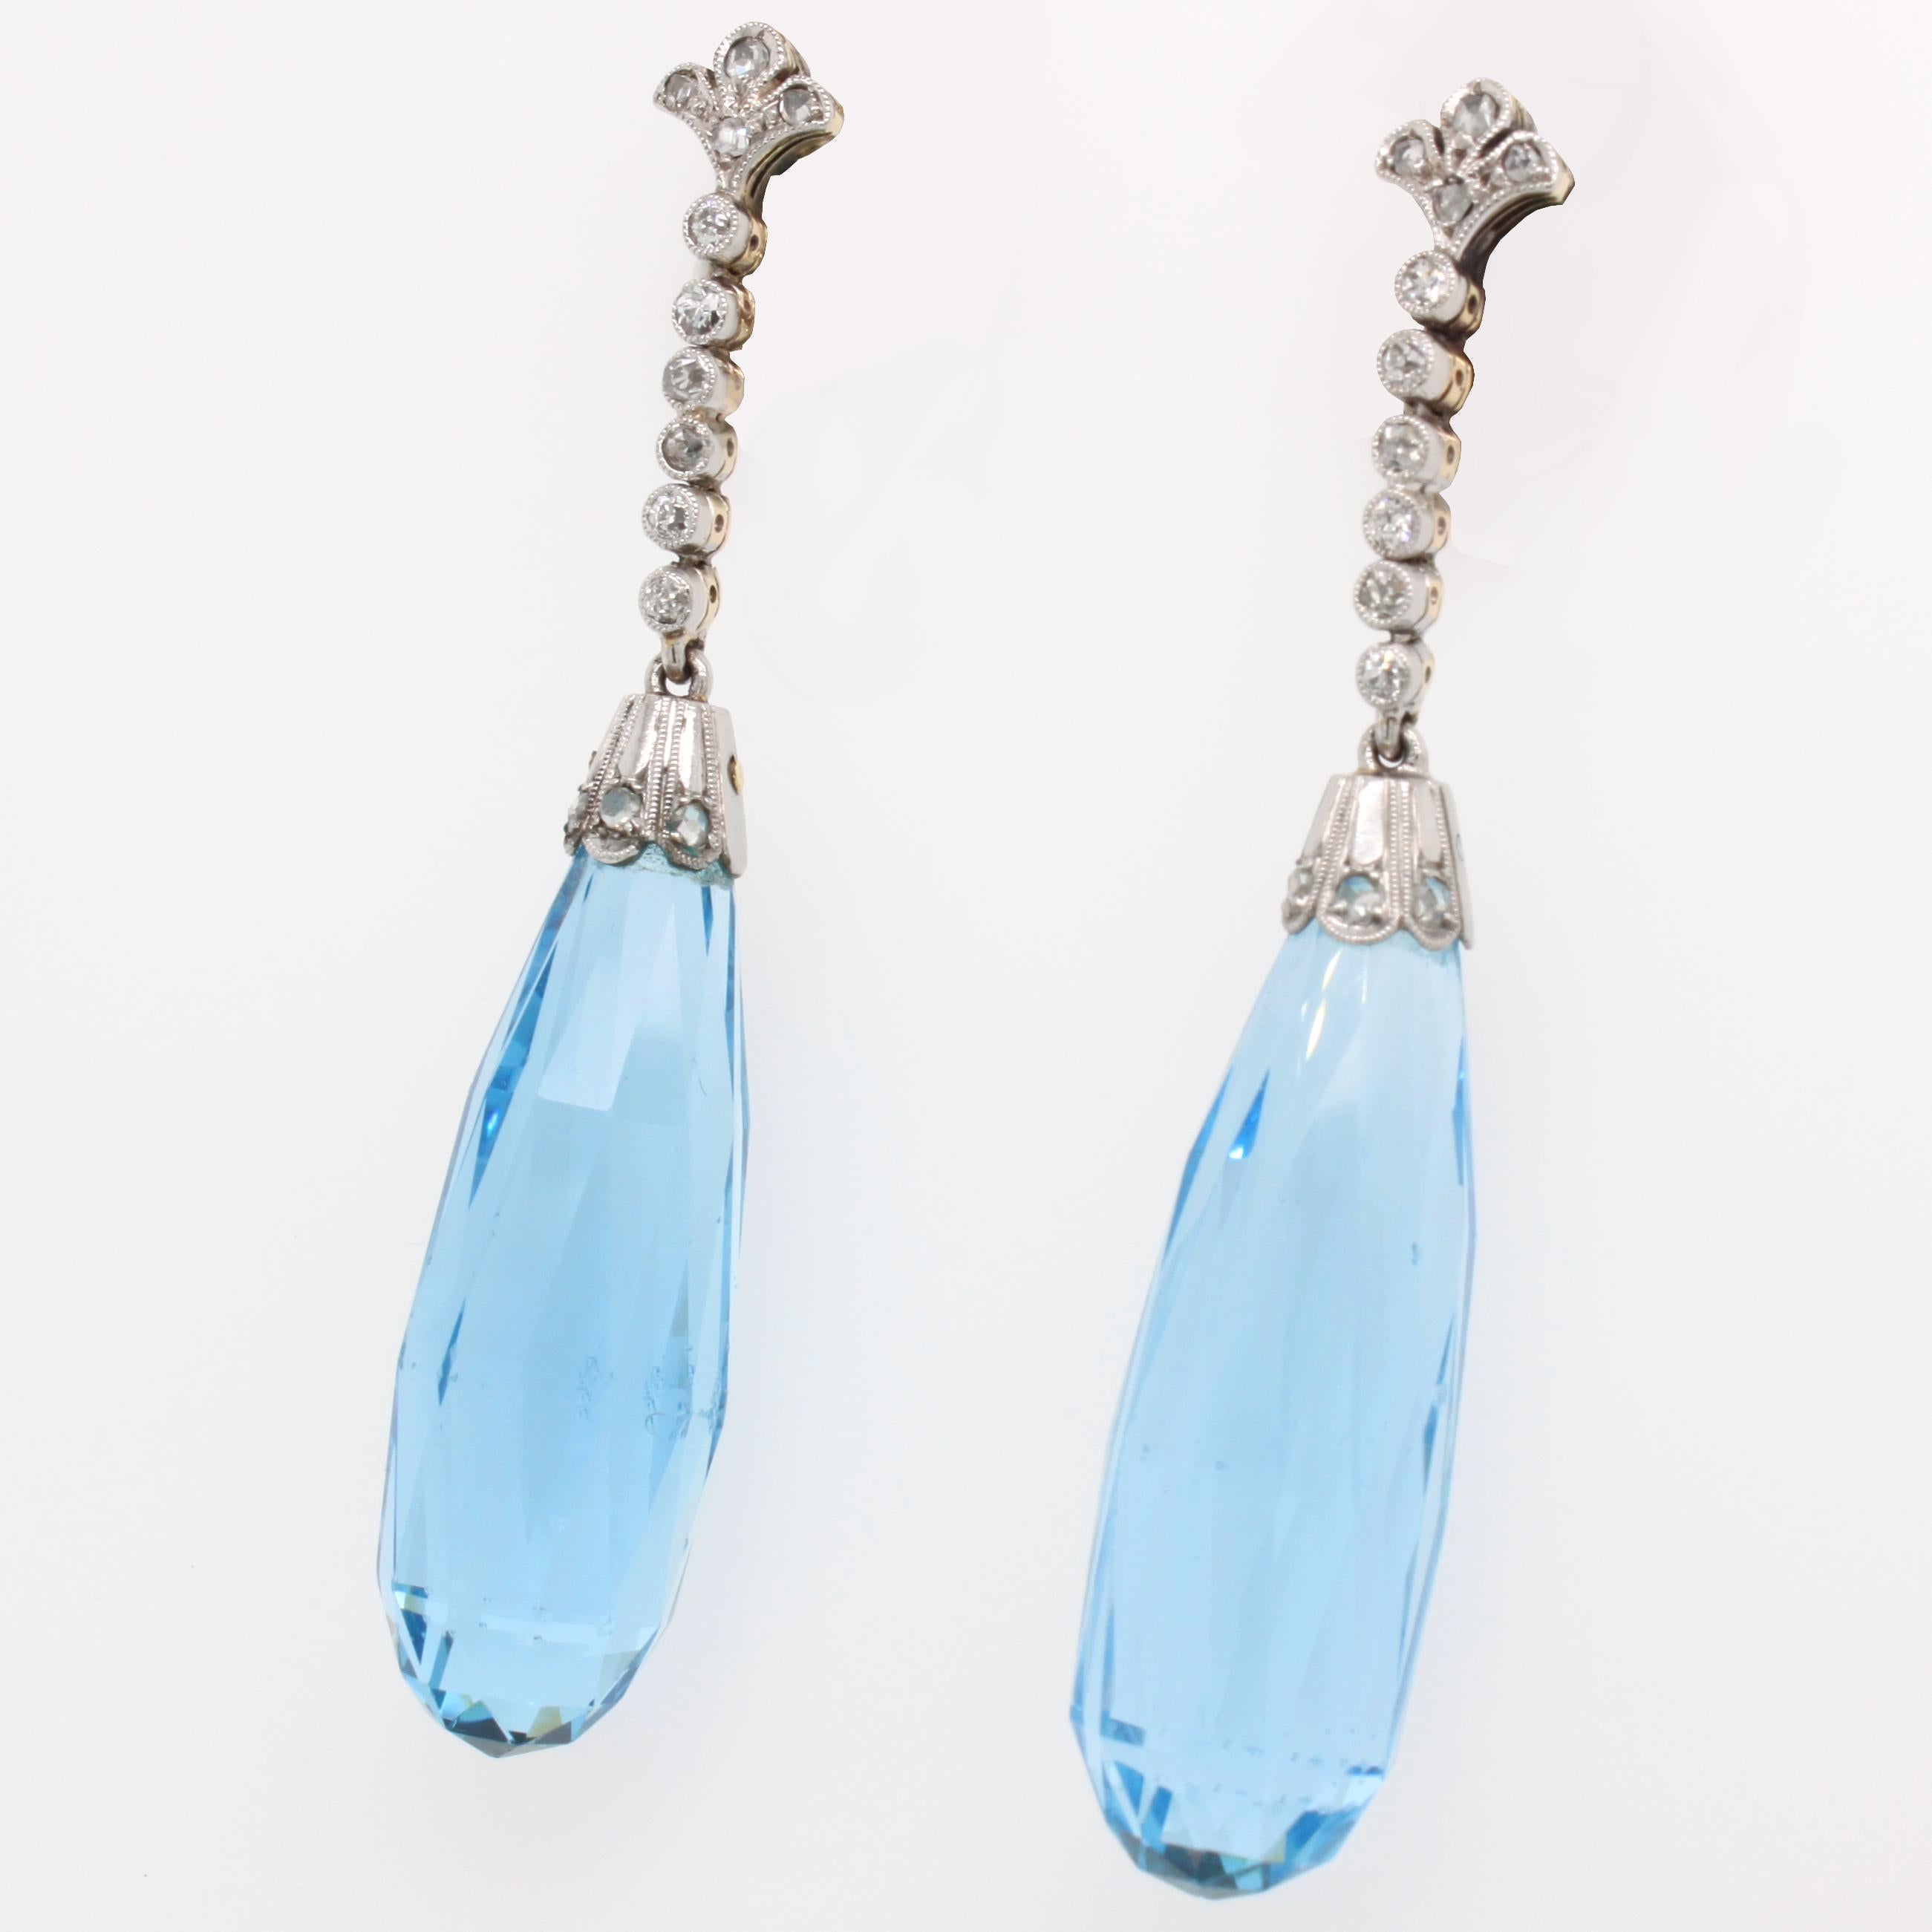 Important pair of antique aquamarine briolette and diamond earclips, 1910s. The aquamarines exhibit a stunning crystal and blue colour, which is only prevalent in exceptional aquamarines from Santa Maria, Brazil. Both briolettes weigh approximately